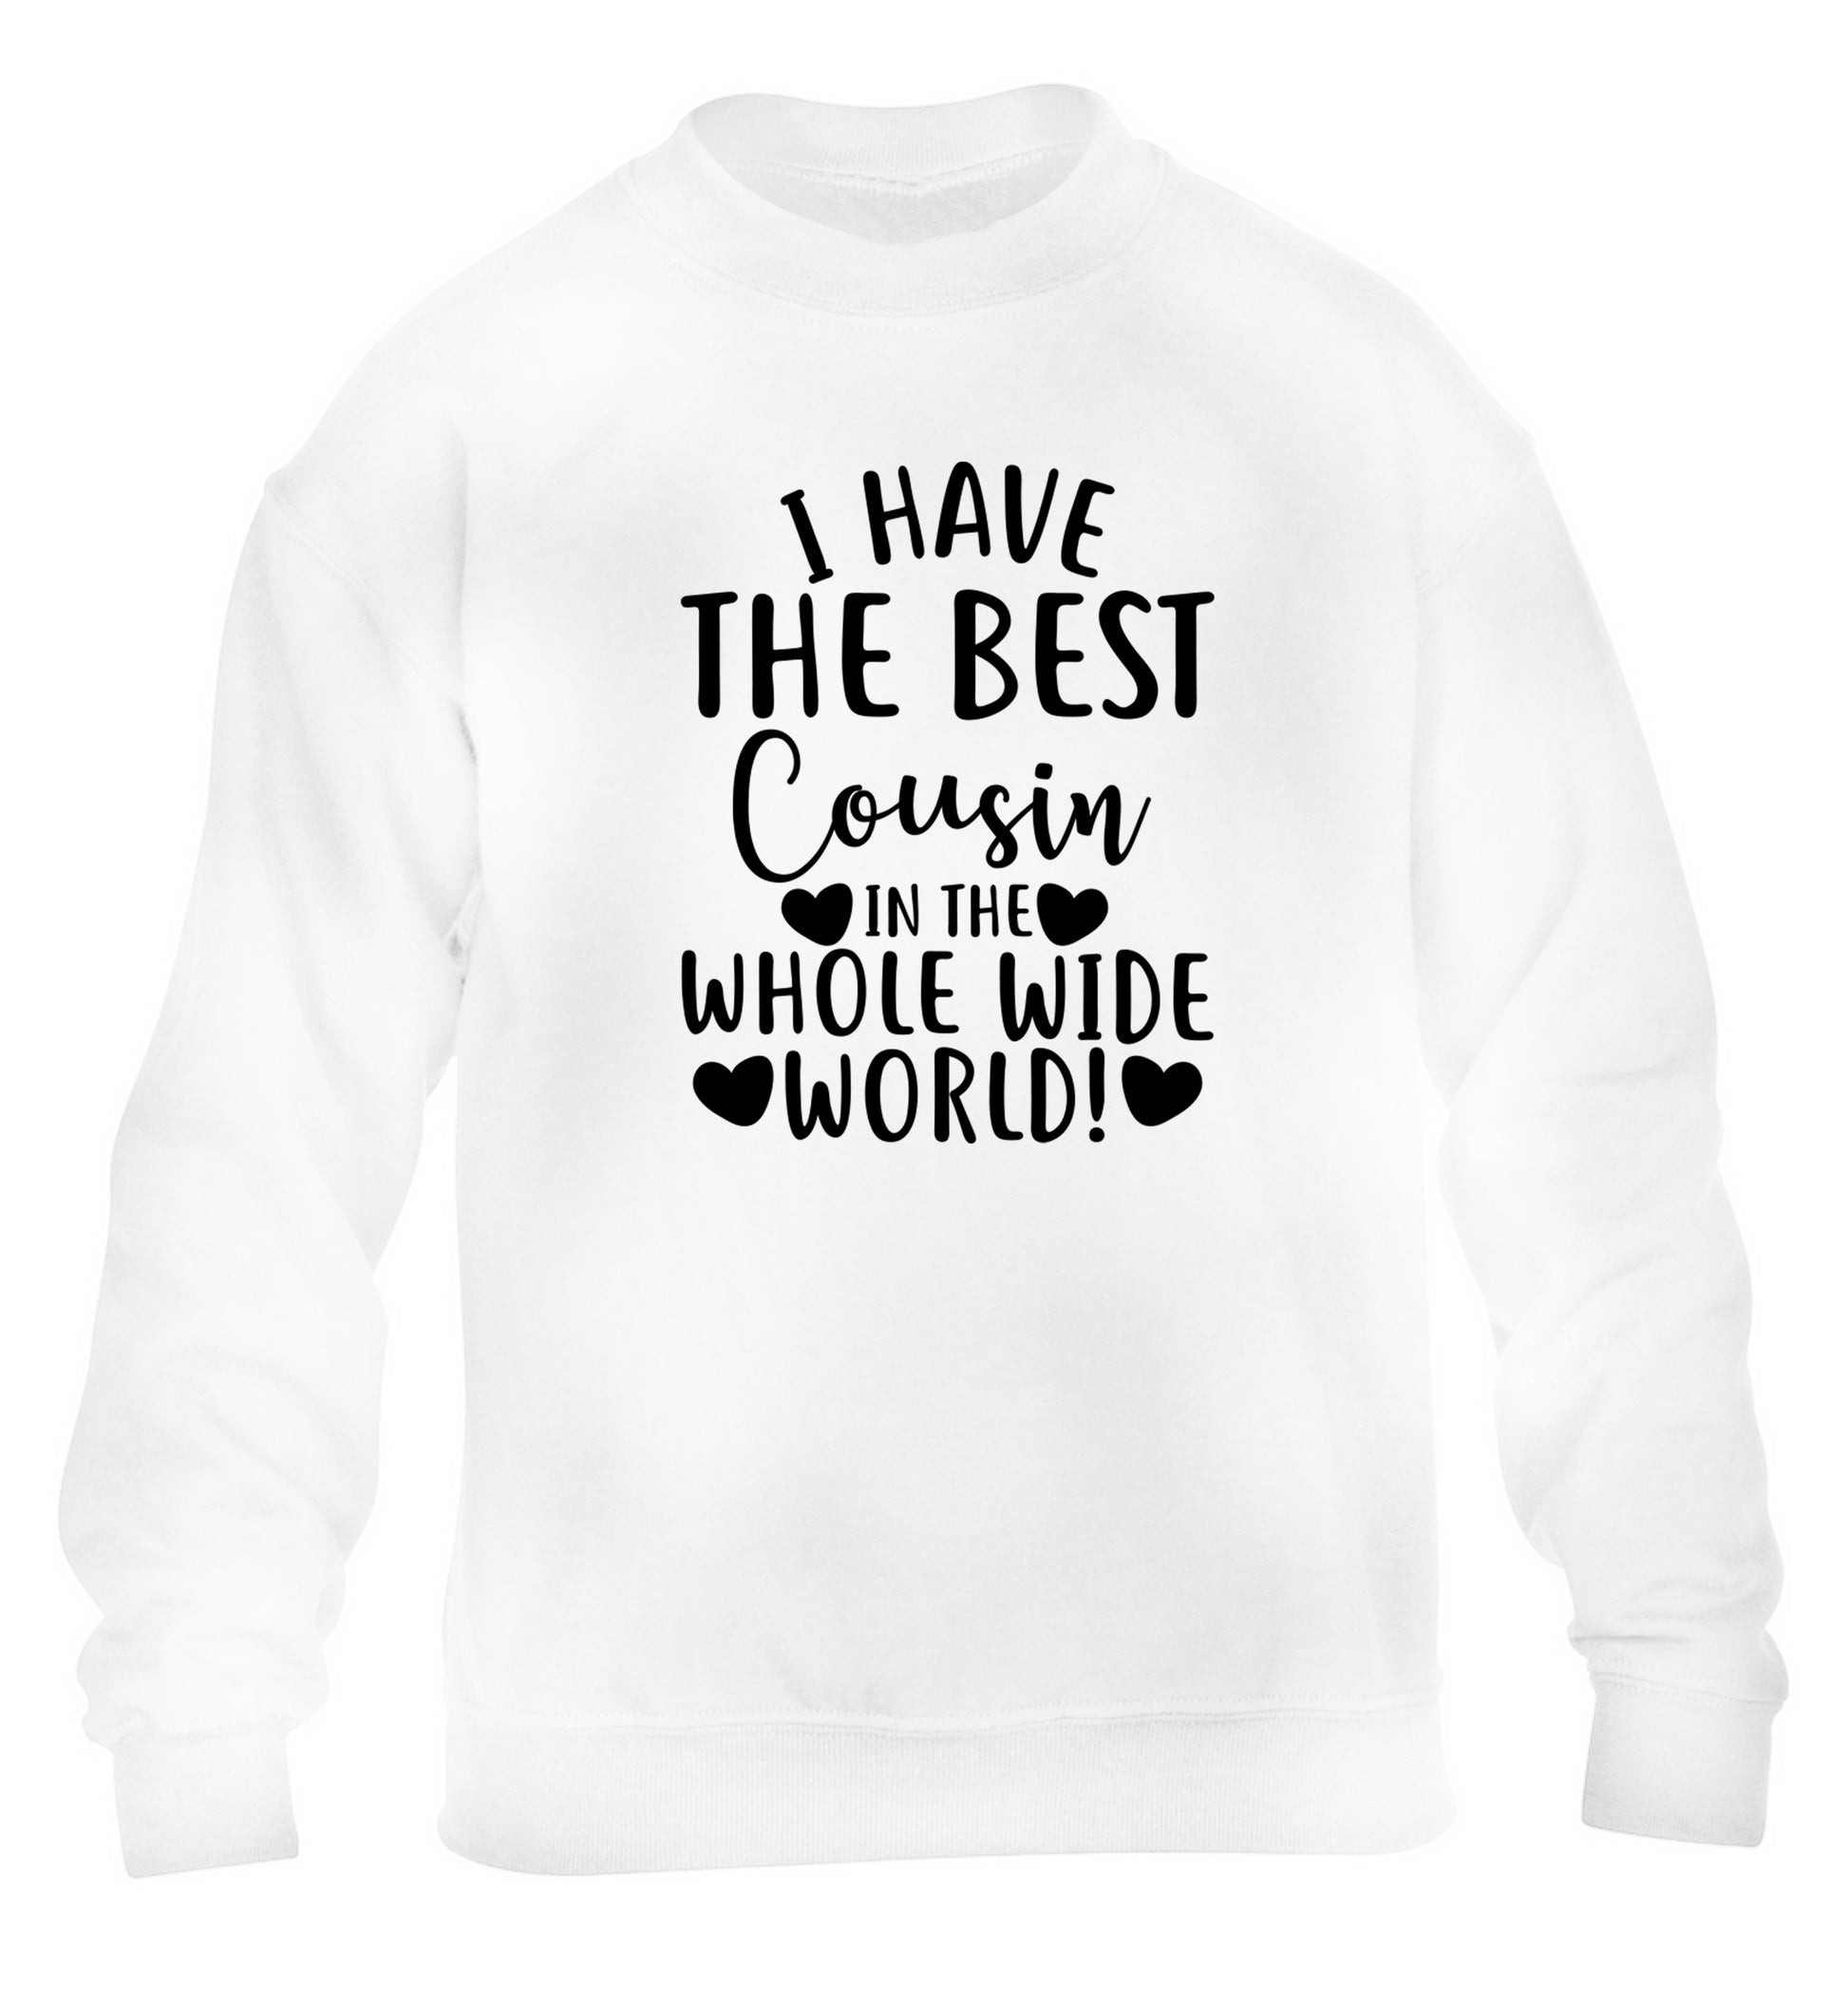 I have the best cousin in the whole wide world! children's white sweater 12-13 Years